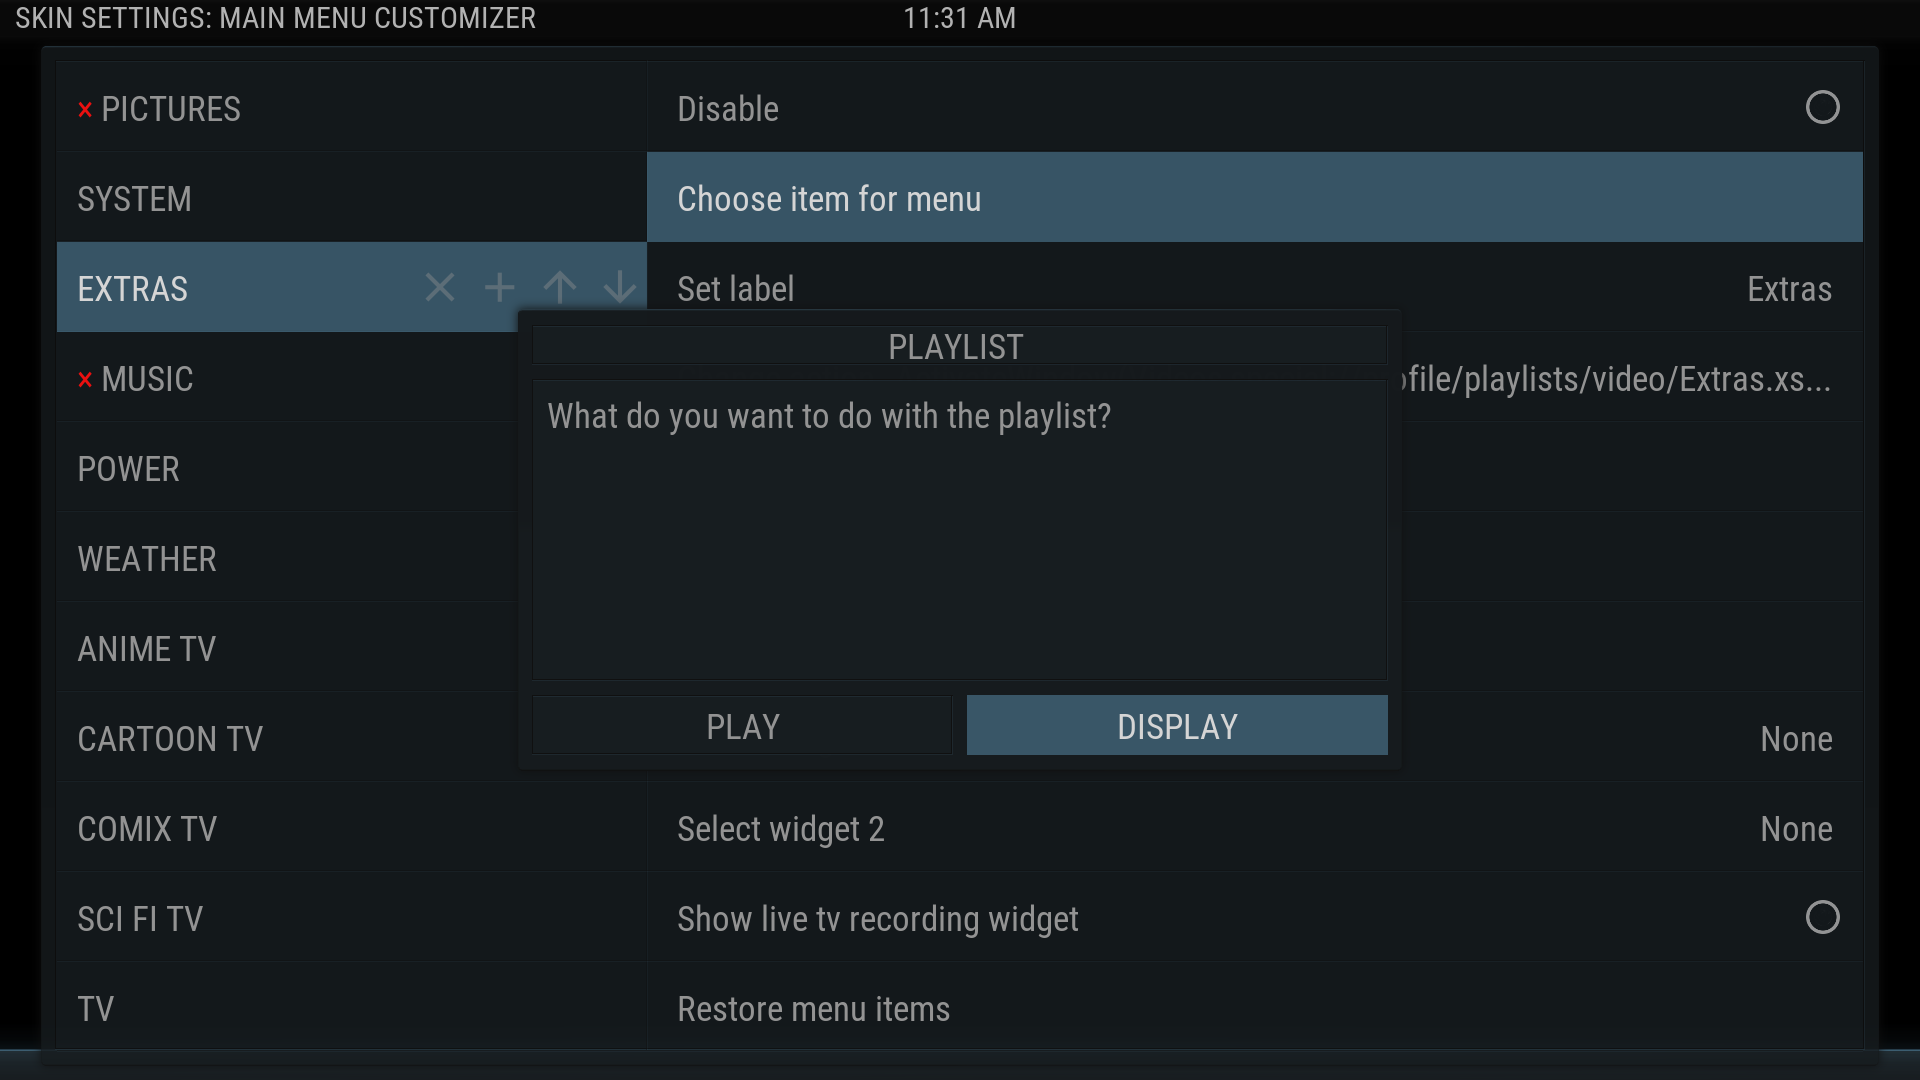 5. In the What do you want to do with the playlist? box, choose Display